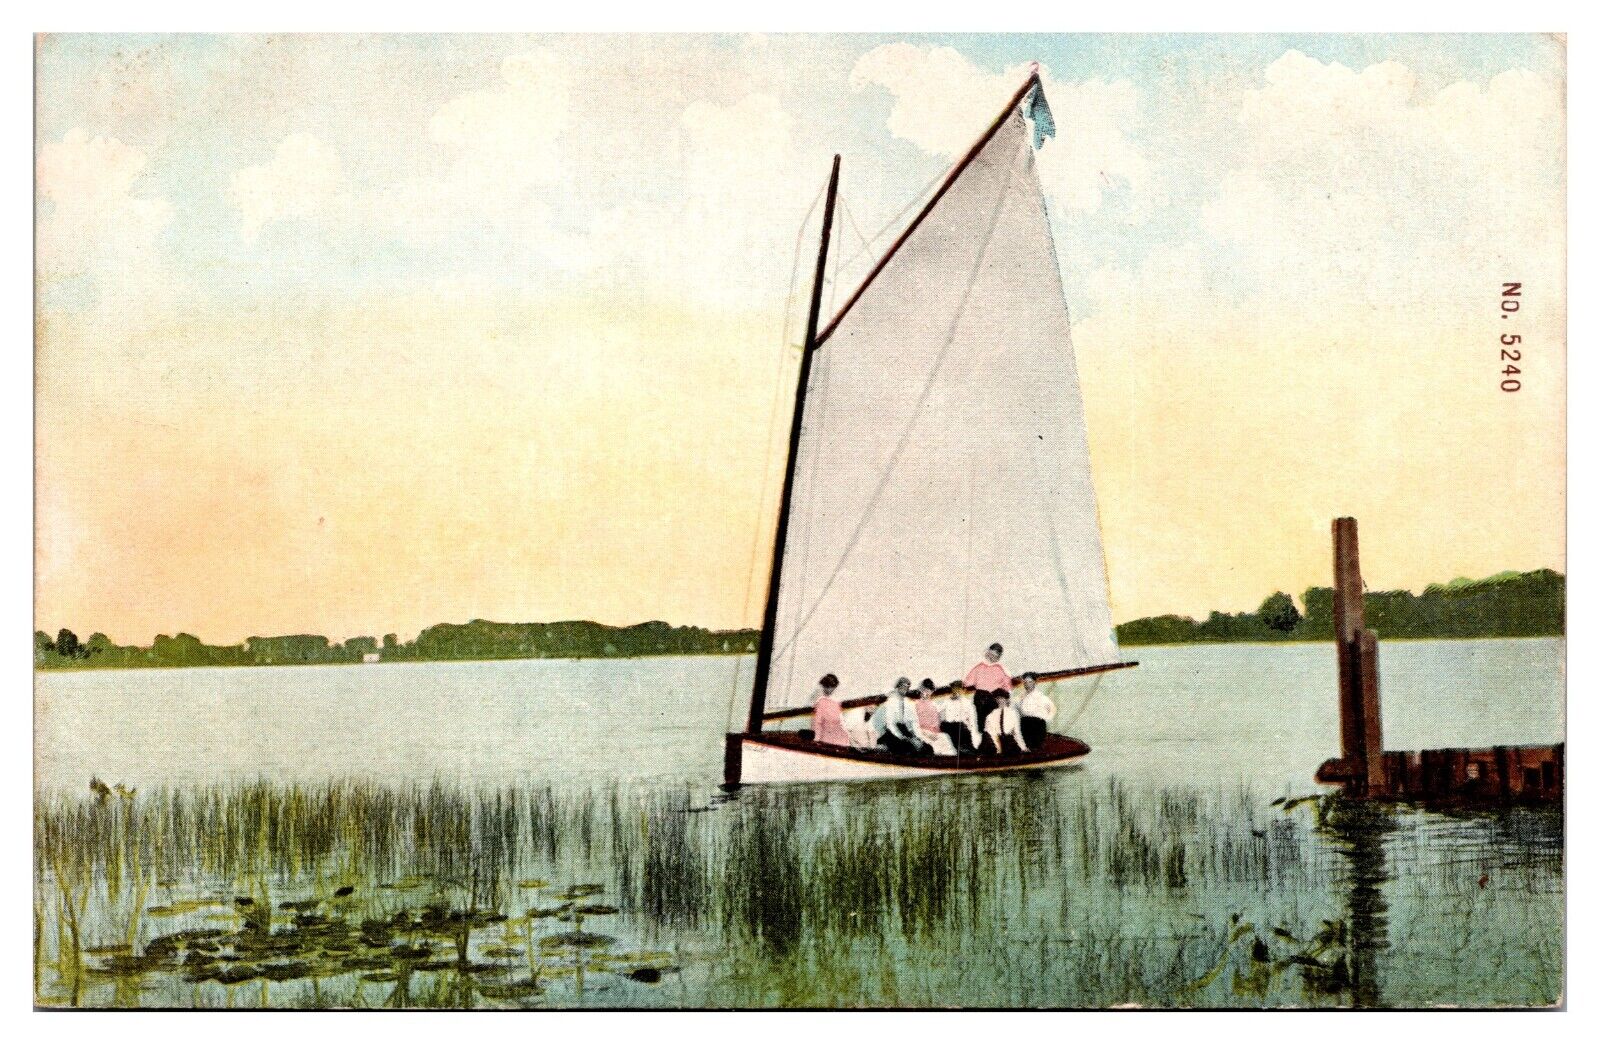 1909 People In A Sailboat On A Pond, Scenic, Postcard 